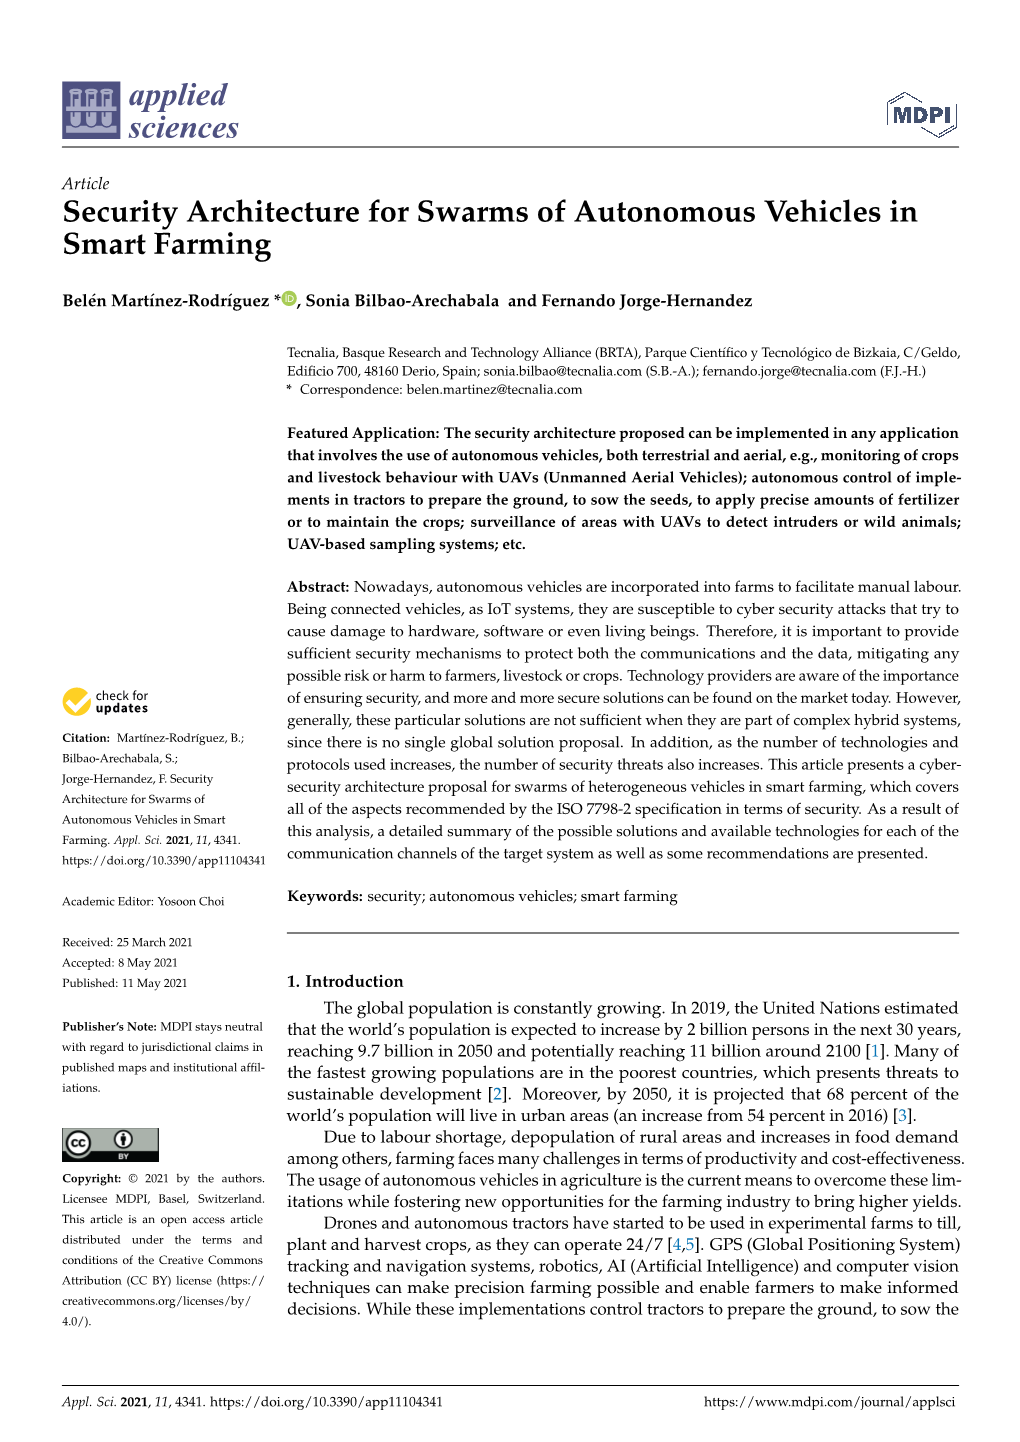 Security Architecture for Swarms of Autonomous Vehicles in Smart Farming